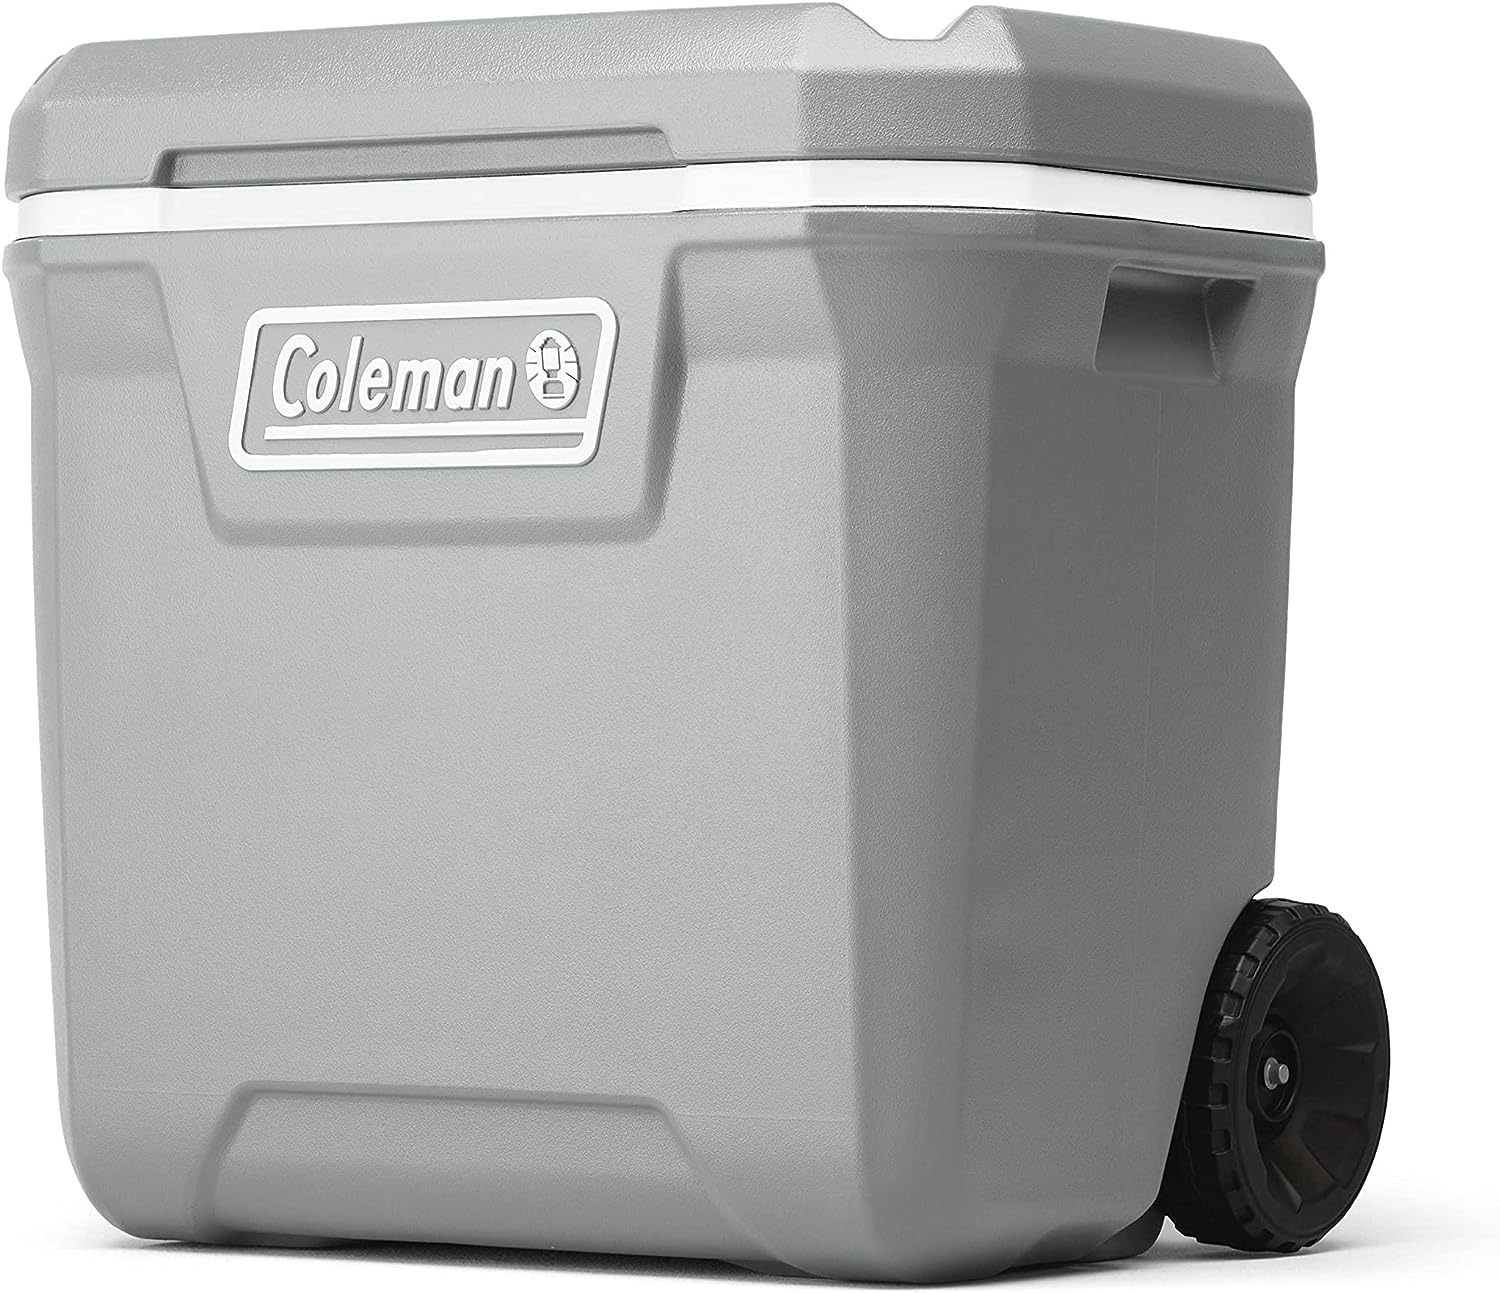 Coleman 316 Series Insulated Portable Cooler with Heavy Duty Wheels - $55